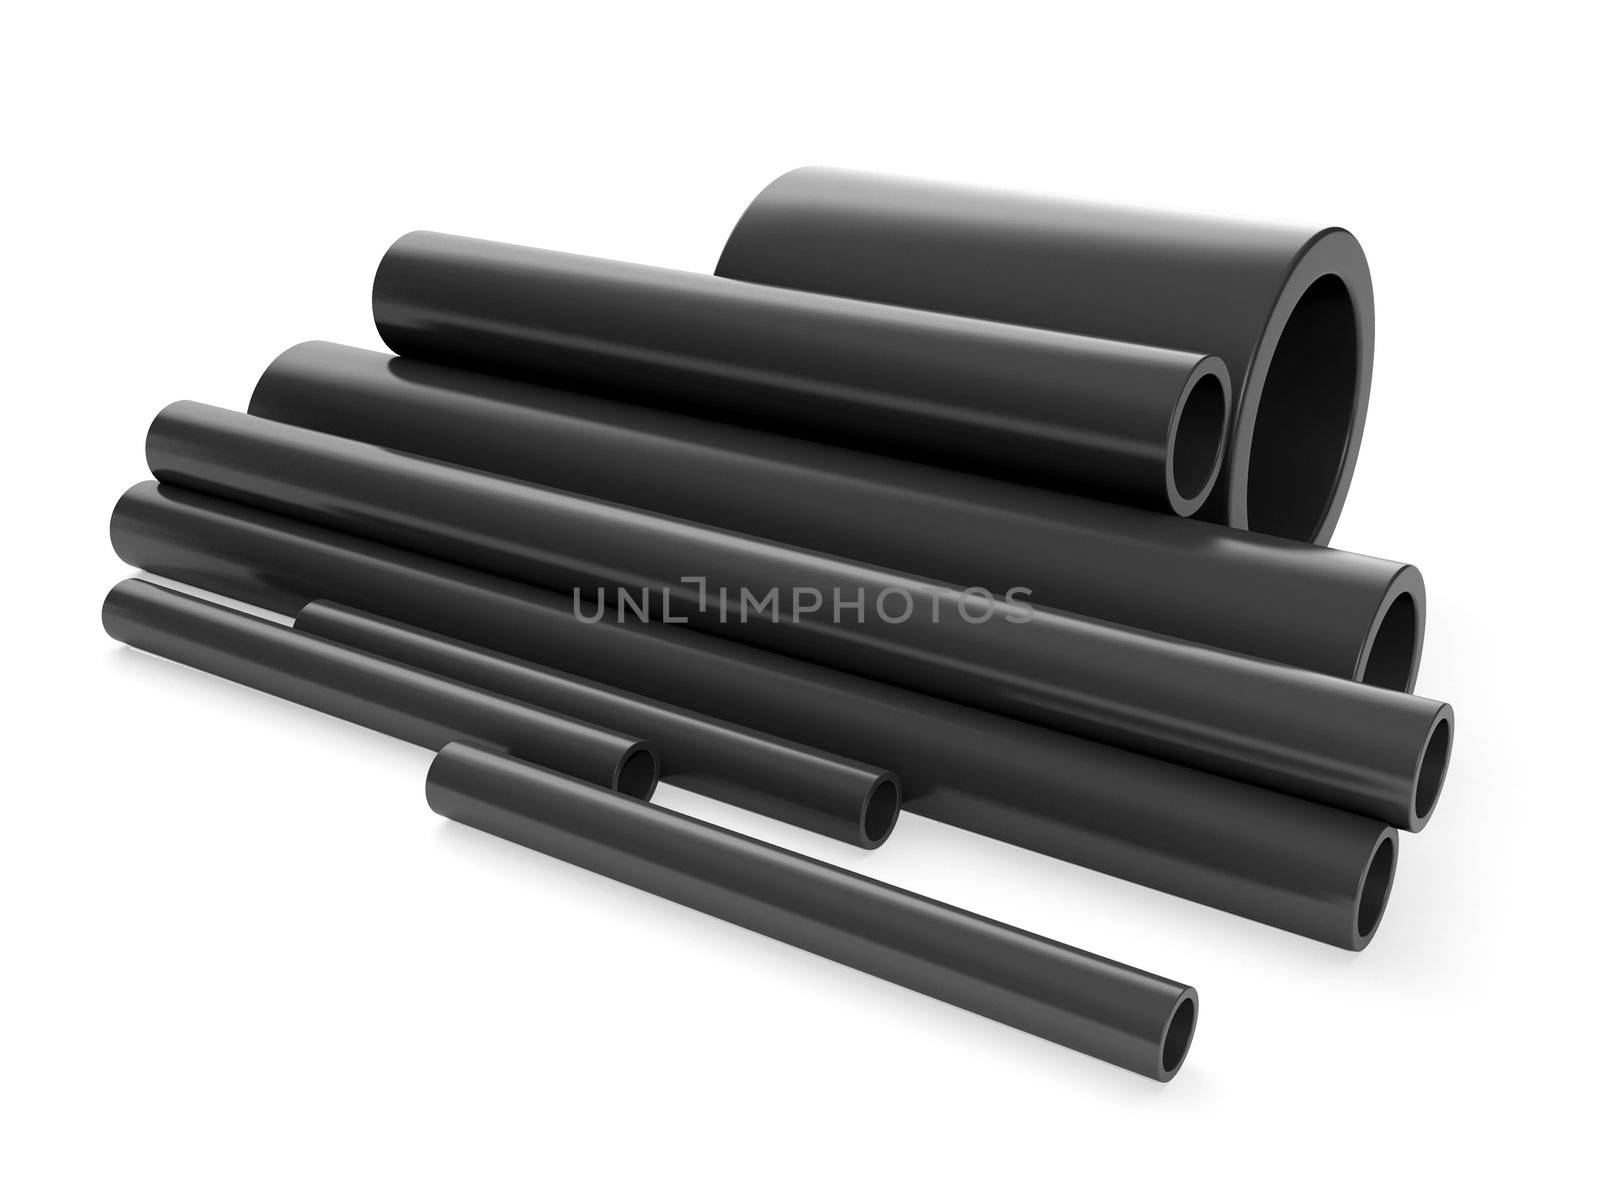 3d illustration: A group of plastic pipes by kolobsek